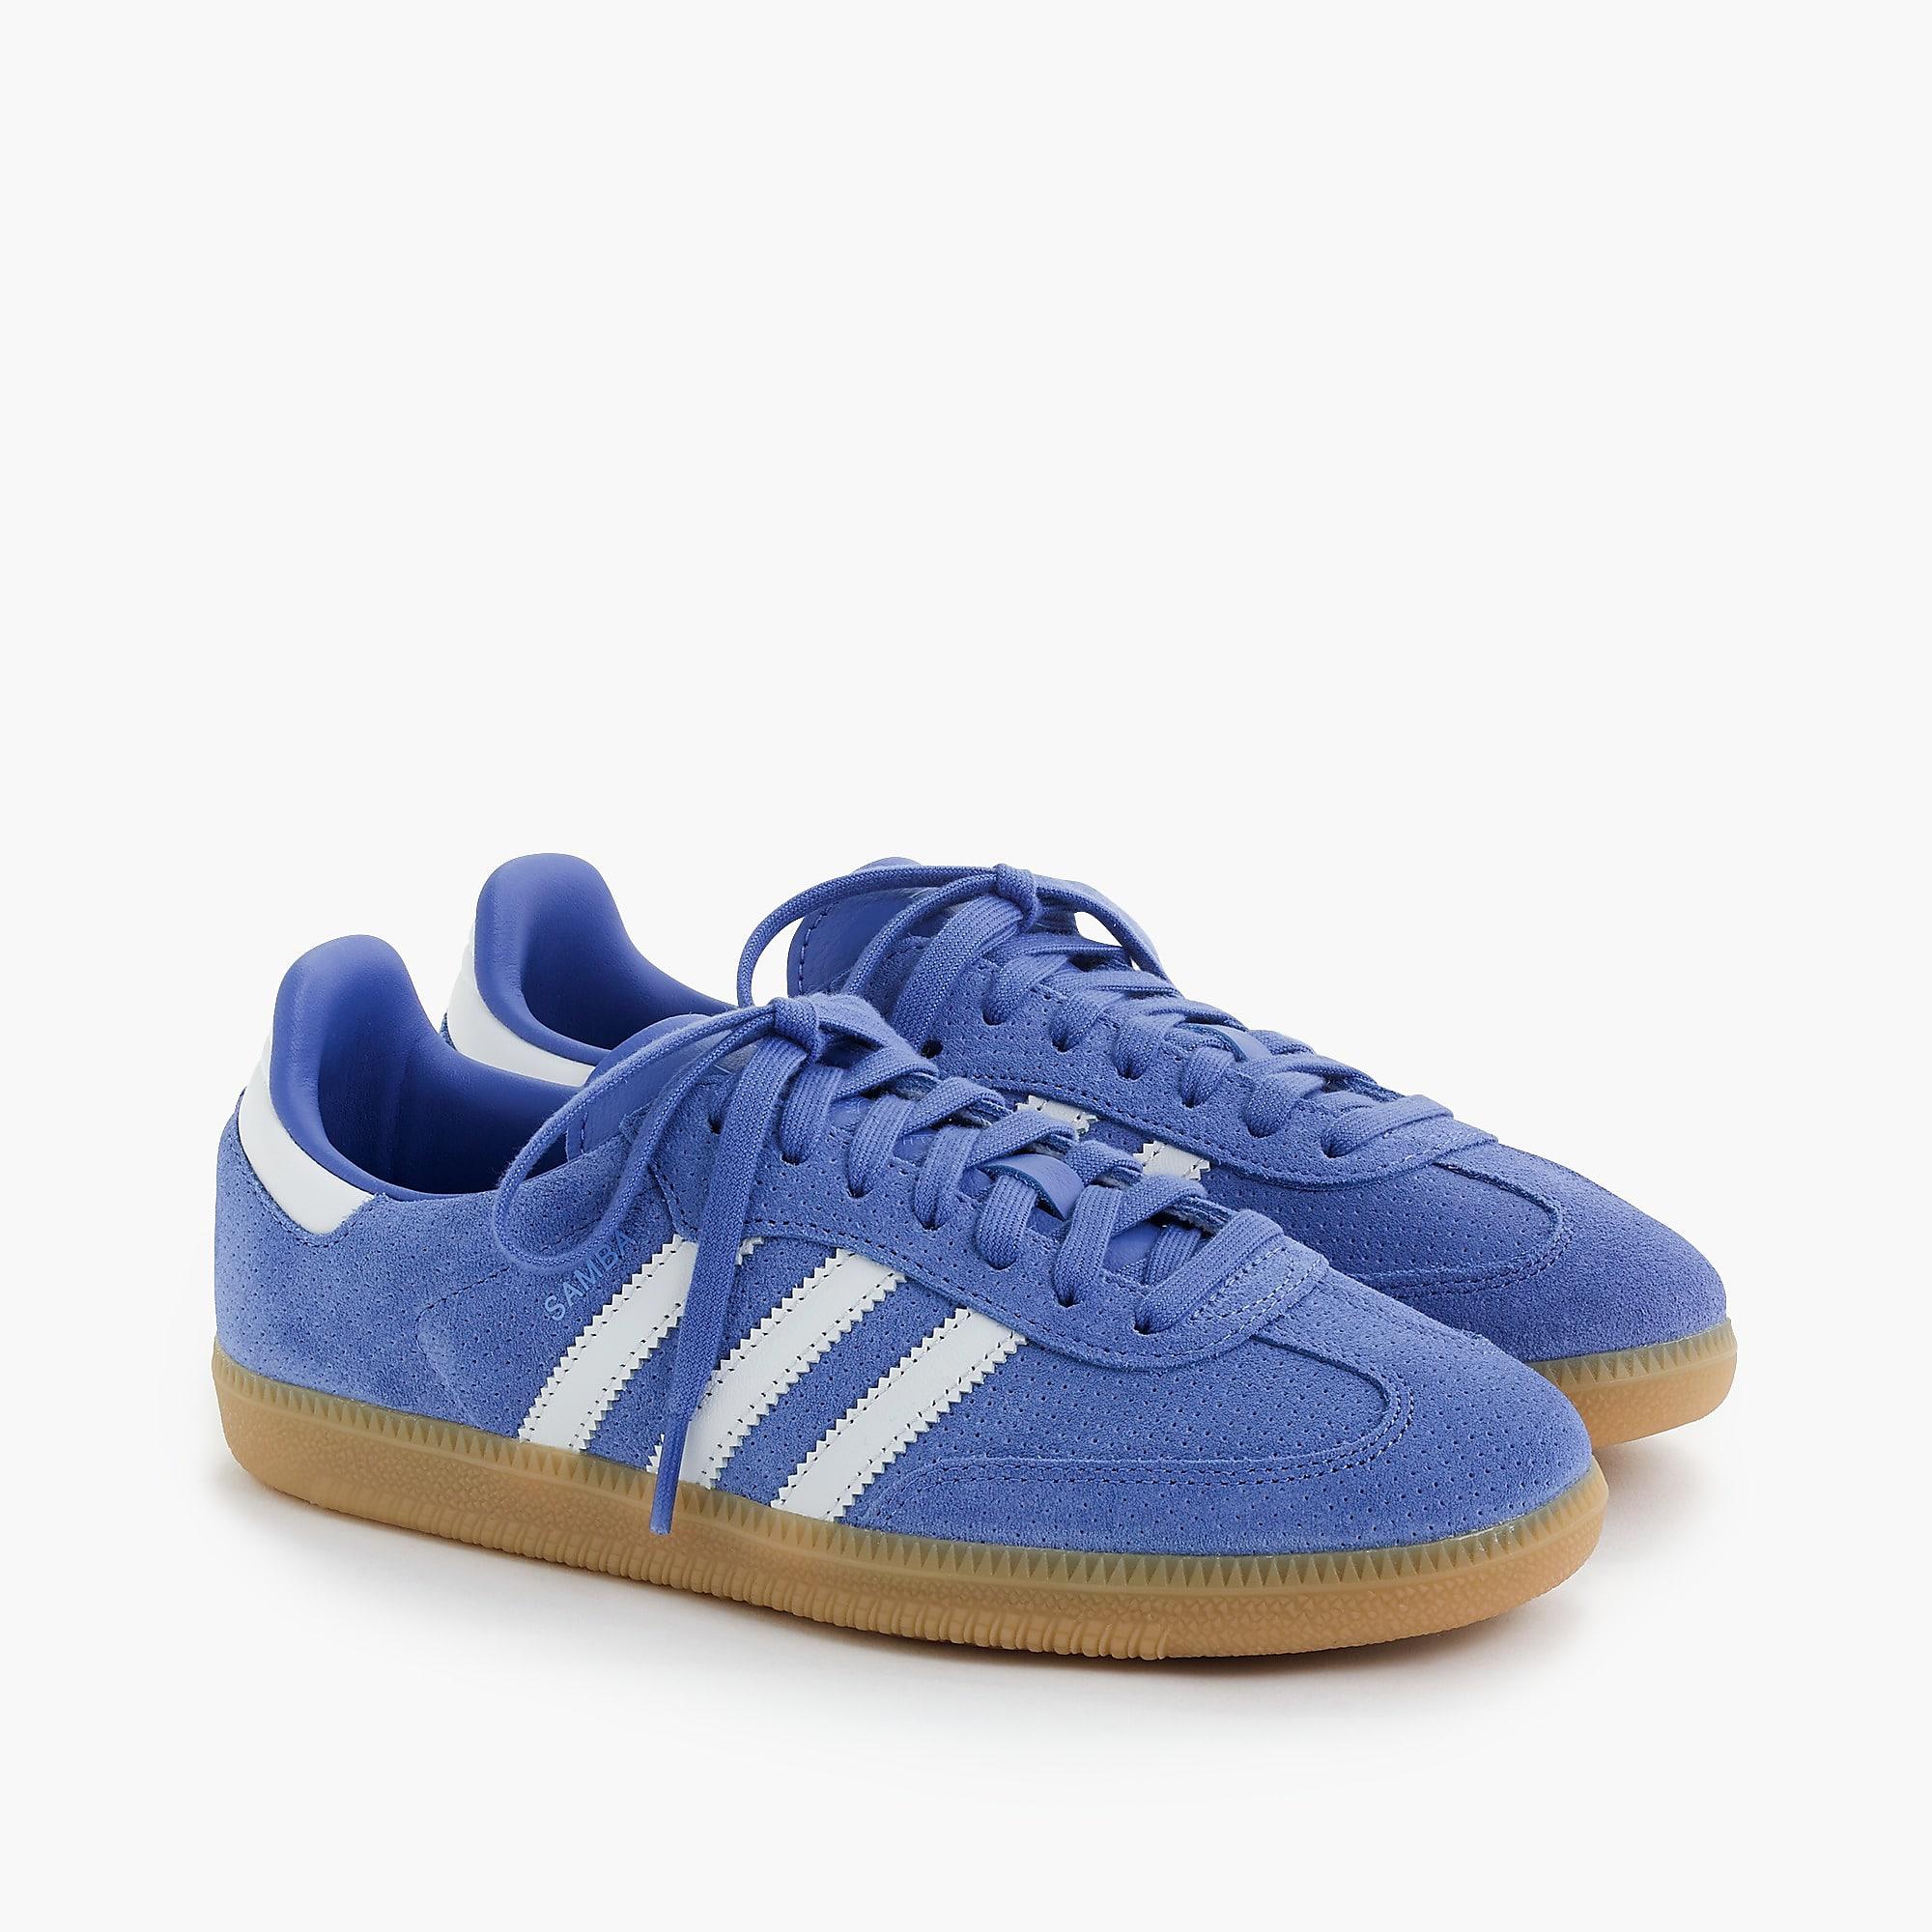 adidas Rubber Samba Sneakers in Periwinkle (Blue) - Lyst